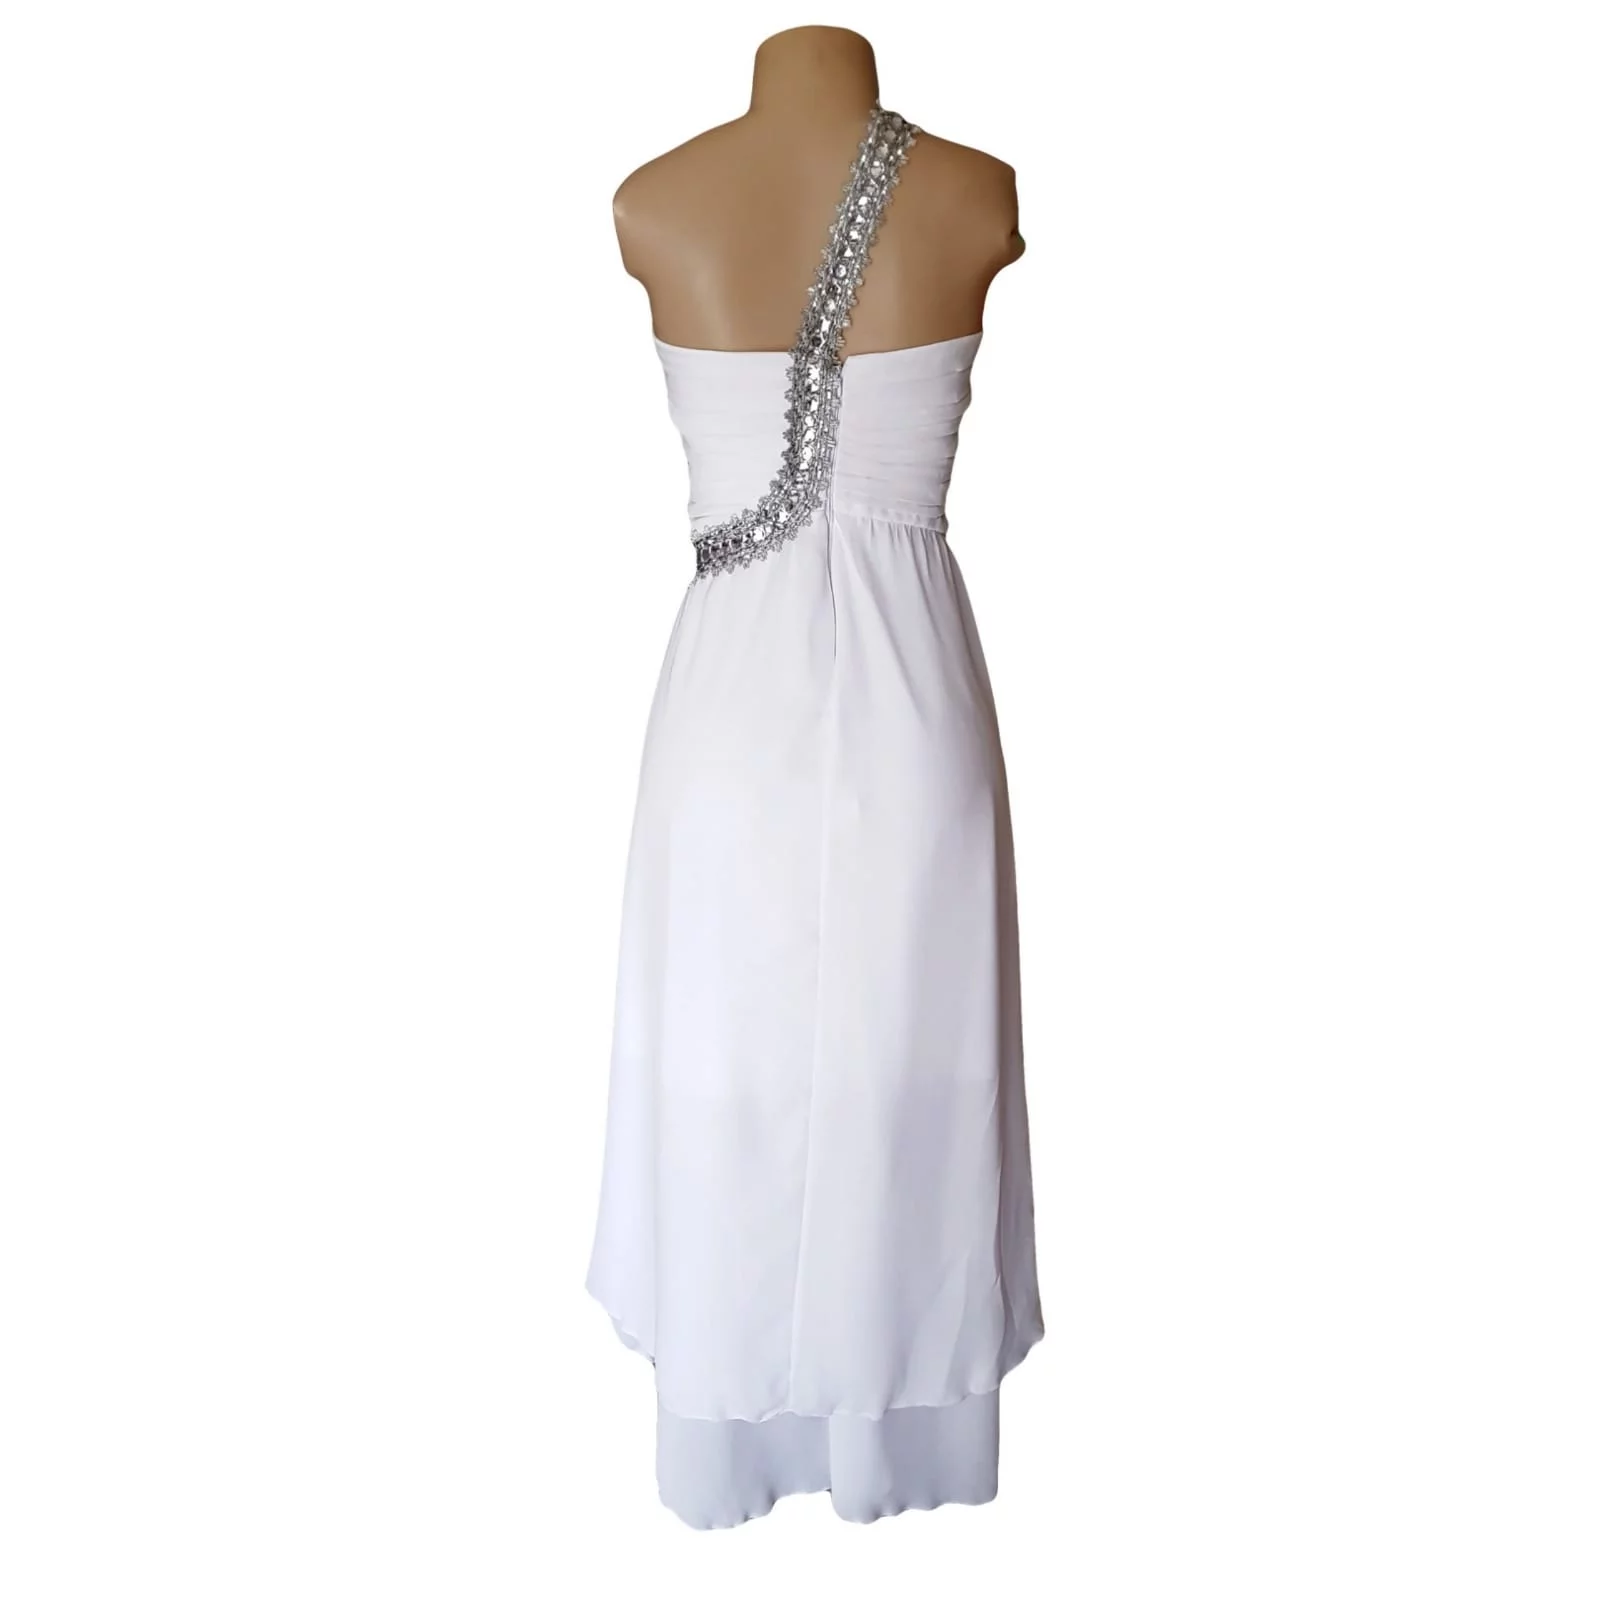 White hi lo beach wedding dress with ruched bodice 5 white hi lo beach wedding dress with ruched bodice and silver detailed strap in an angle from waist over the shoulder to the back. Chiffon bride dress with a doubler layer hi lo.